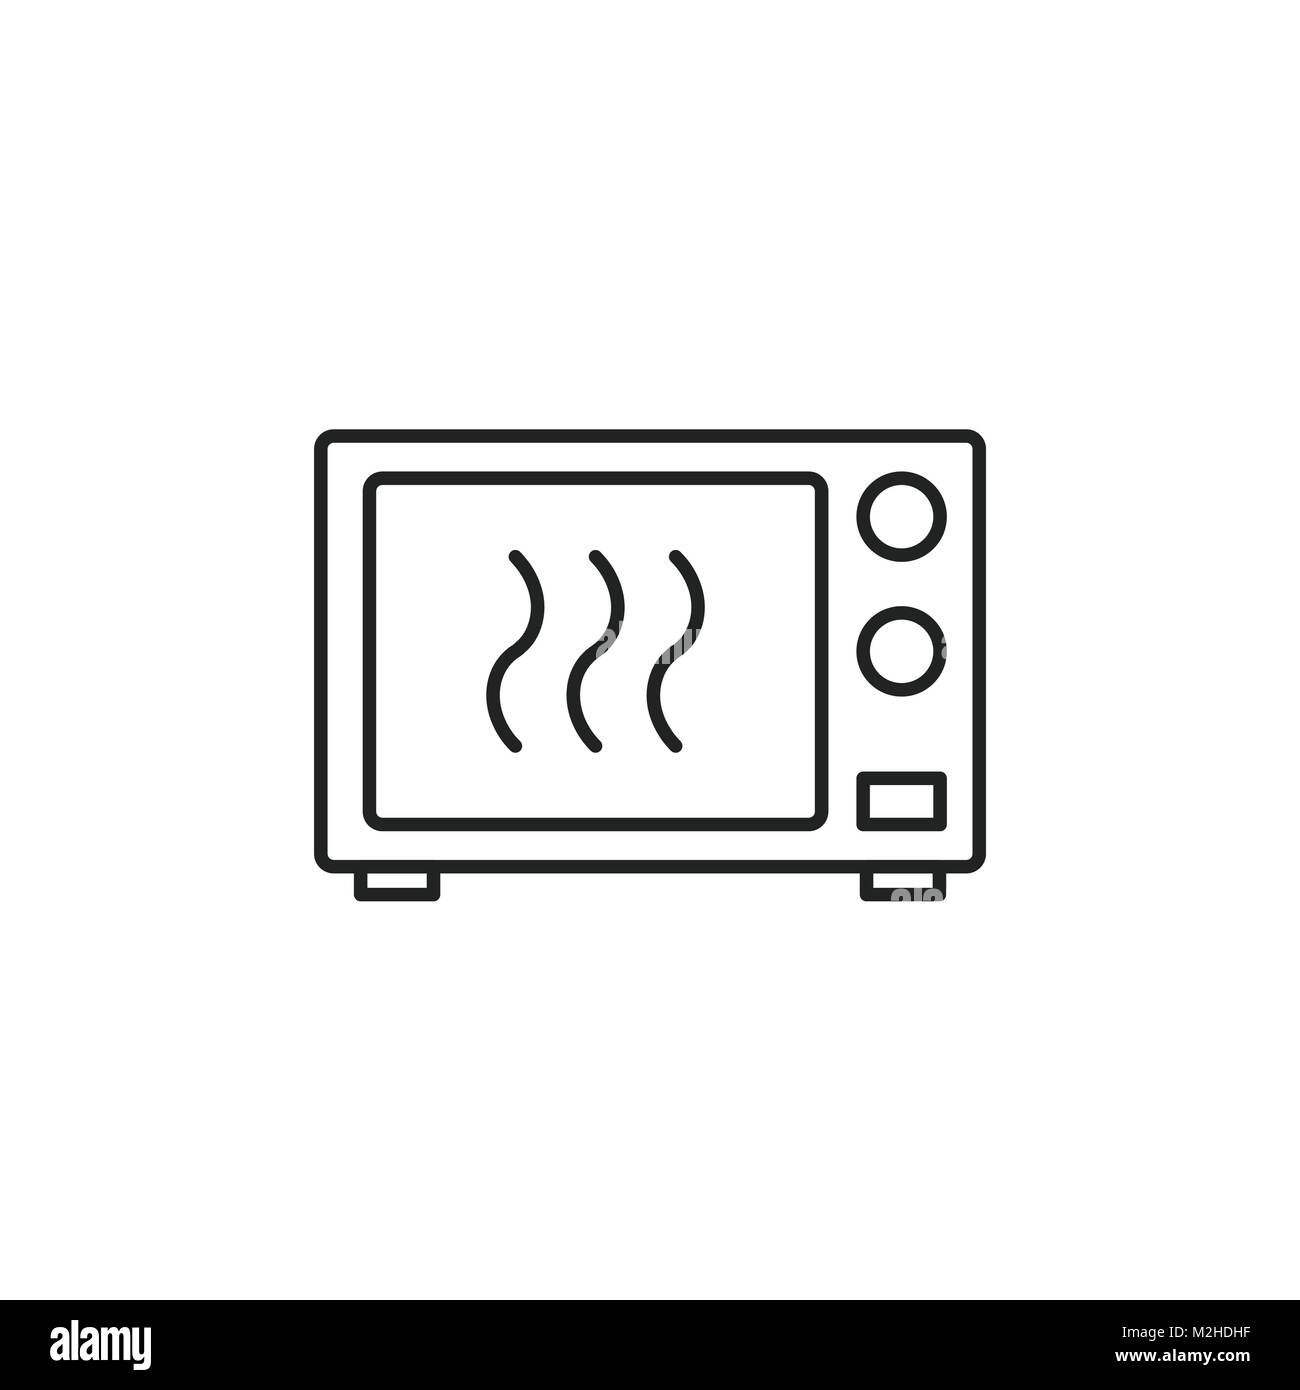 Microwave flat vector icon. Microwave oven symbol logo illustration. Stock Vector